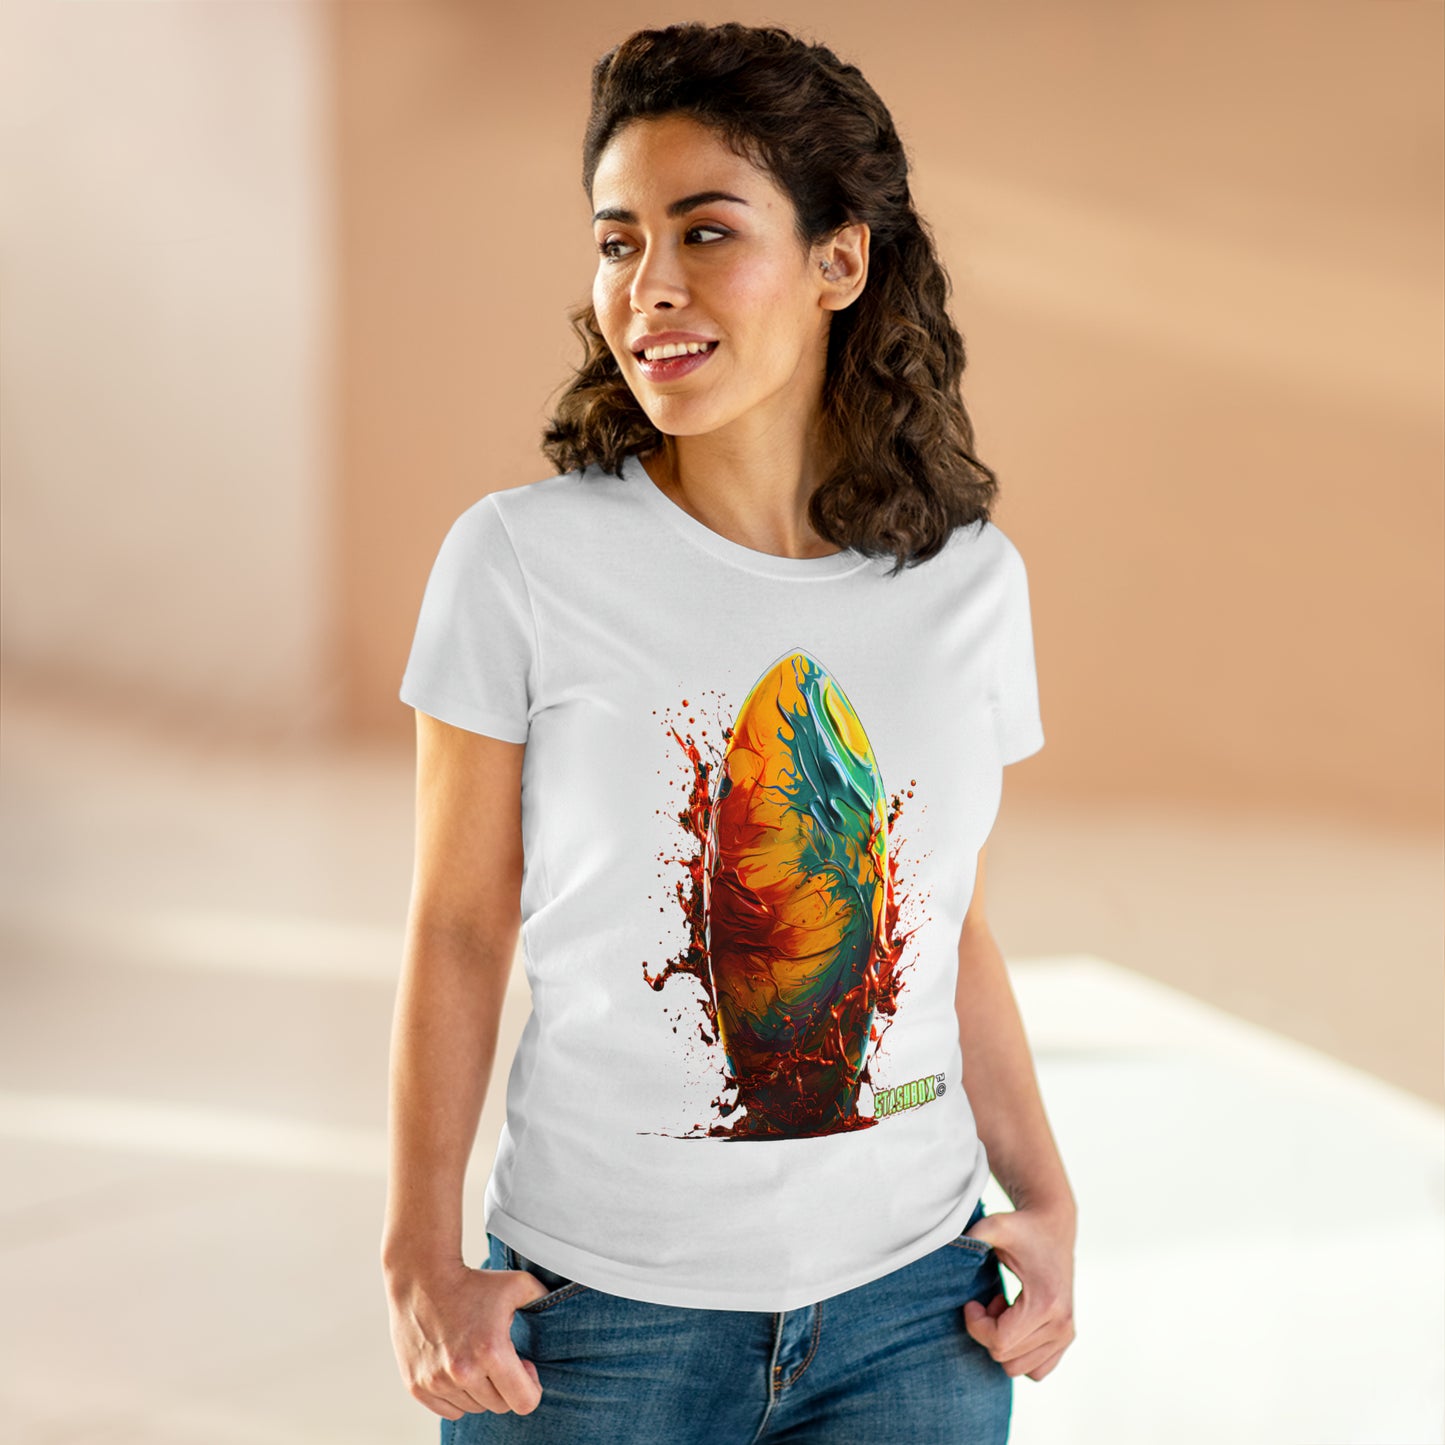 Catch the Wave of Style: Our Women's Midweight Cotton Tee with Surfboard Design #009 brings vibrant paint art to life. Experience the allure of bold colors and beach vibes. 🏄‍♀️🎨 #SurfboardFashion #BeachChic #StashboxDesigns